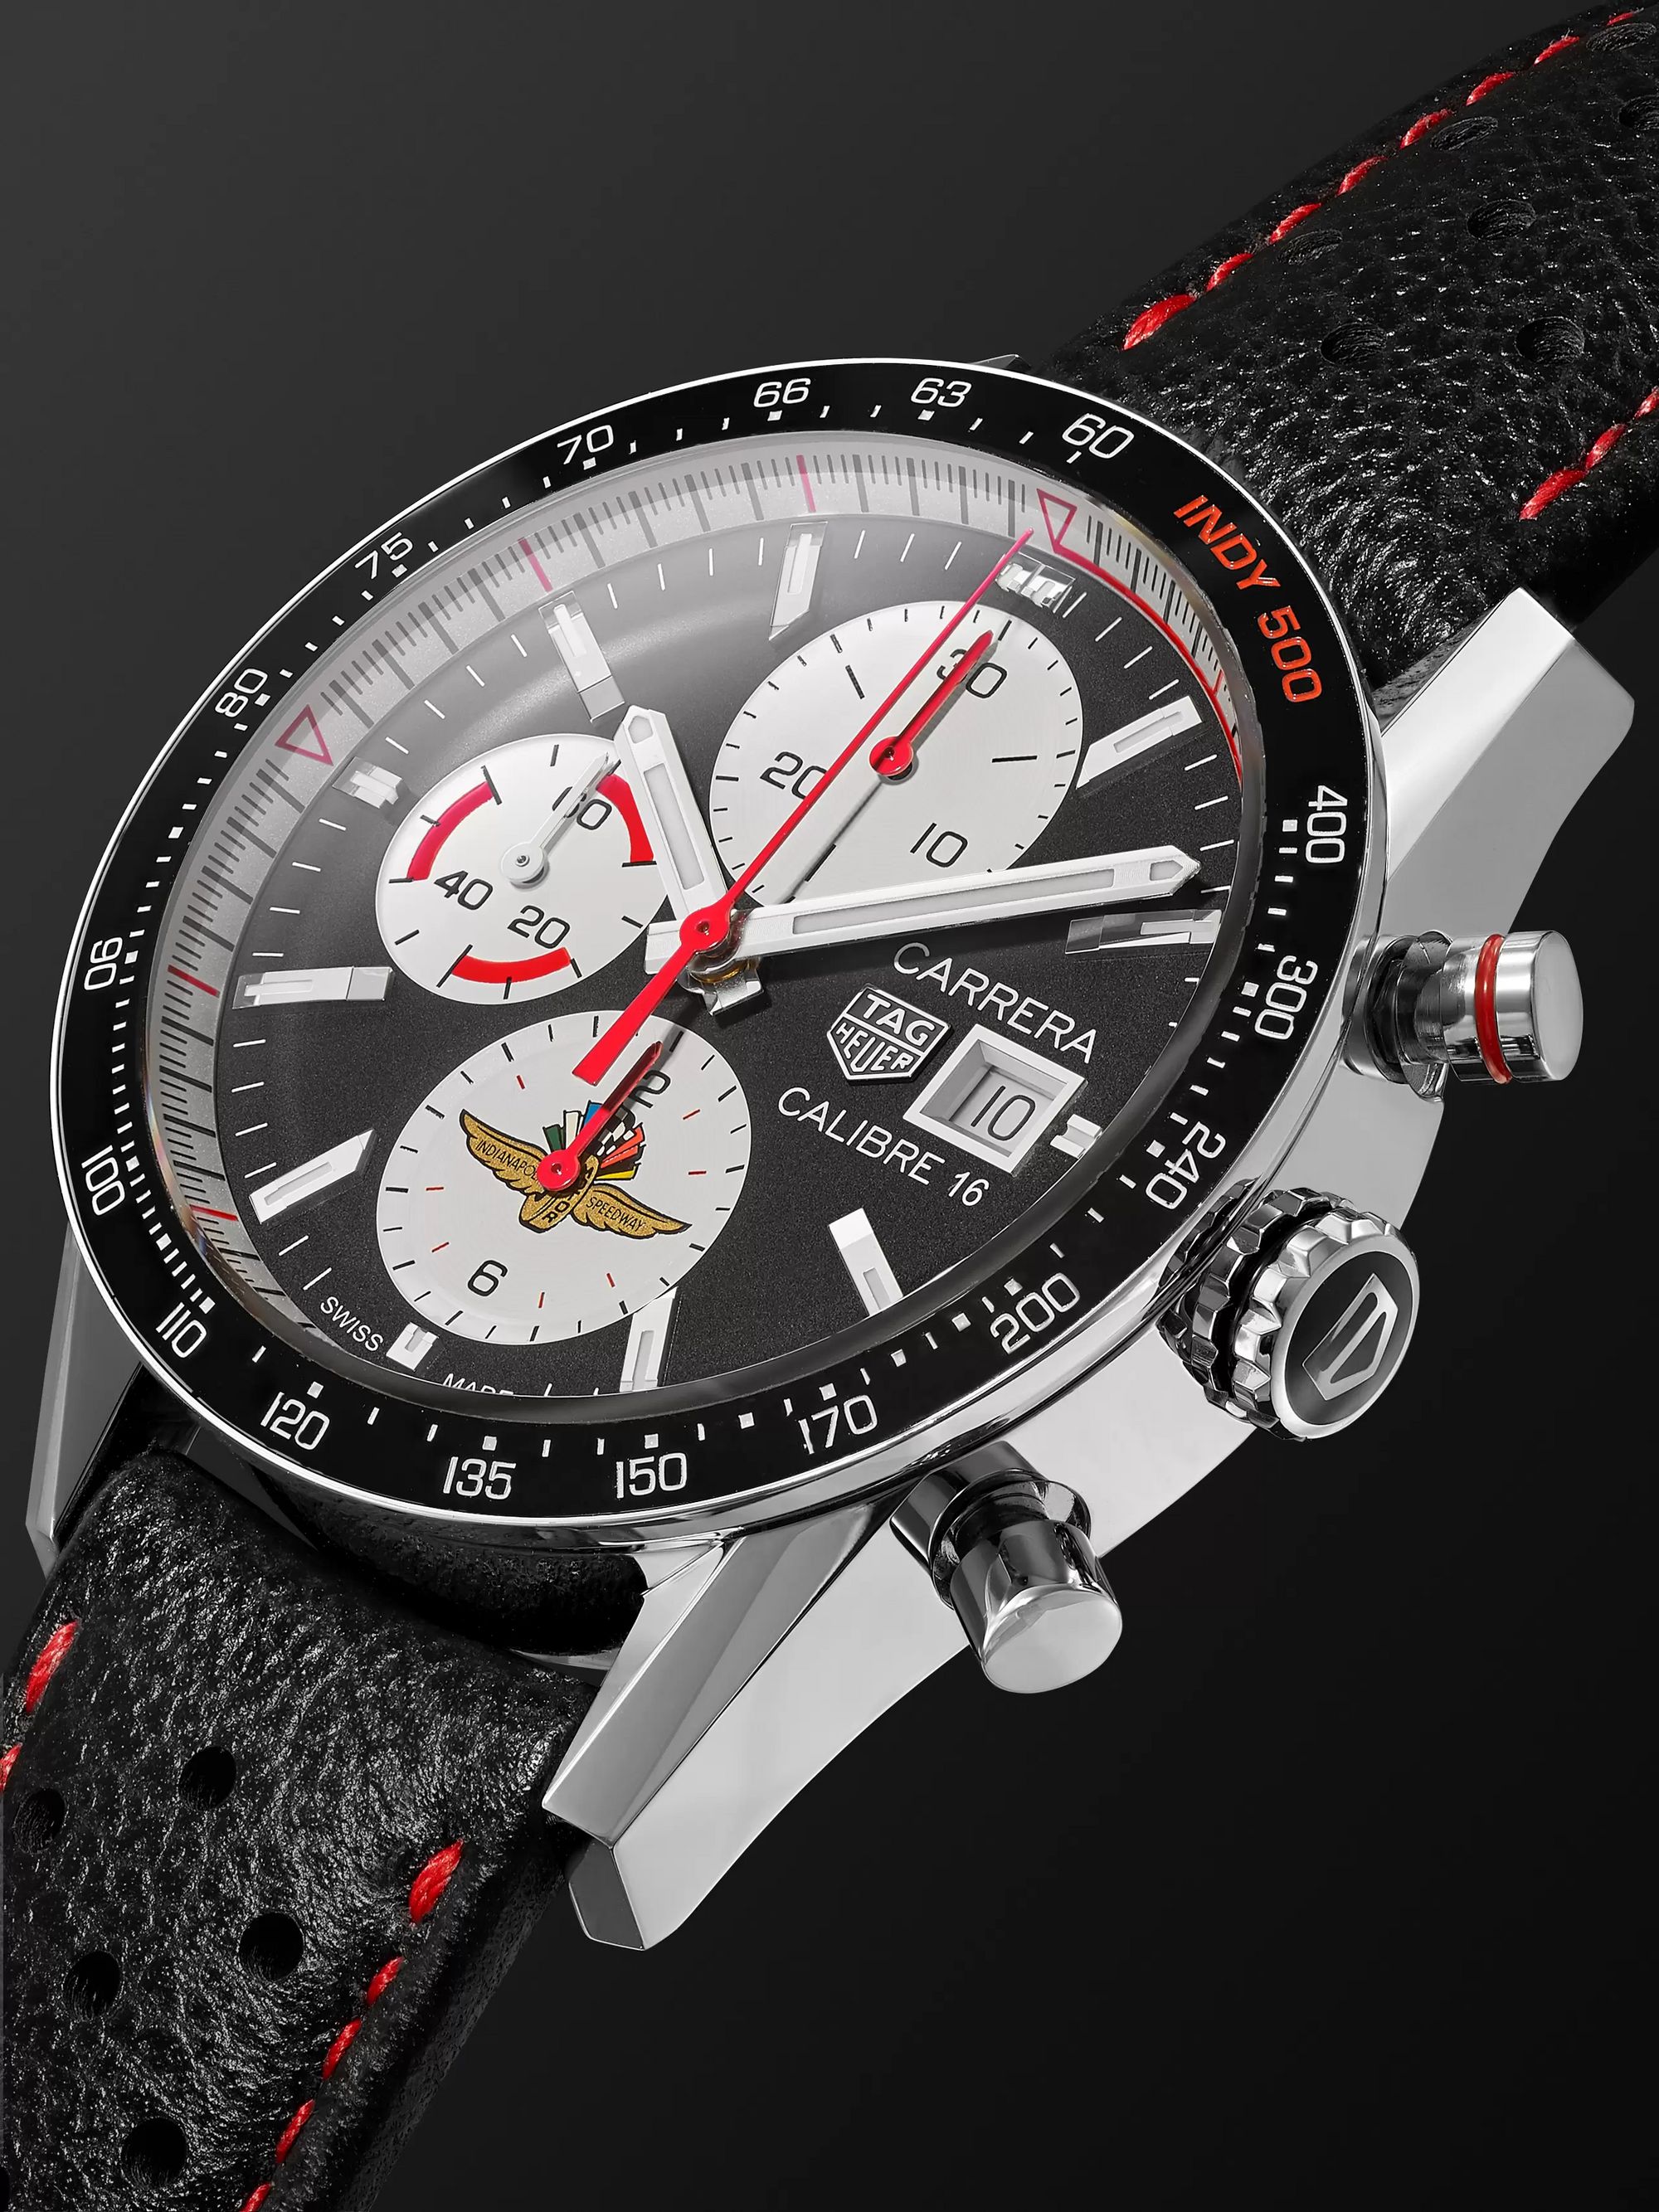 TAG Heuer Carrera Limited Edition Indy 500 Automatic Chronograph 41mm Steel and Leather Watch, Ref. No. CV201AS.FC6429